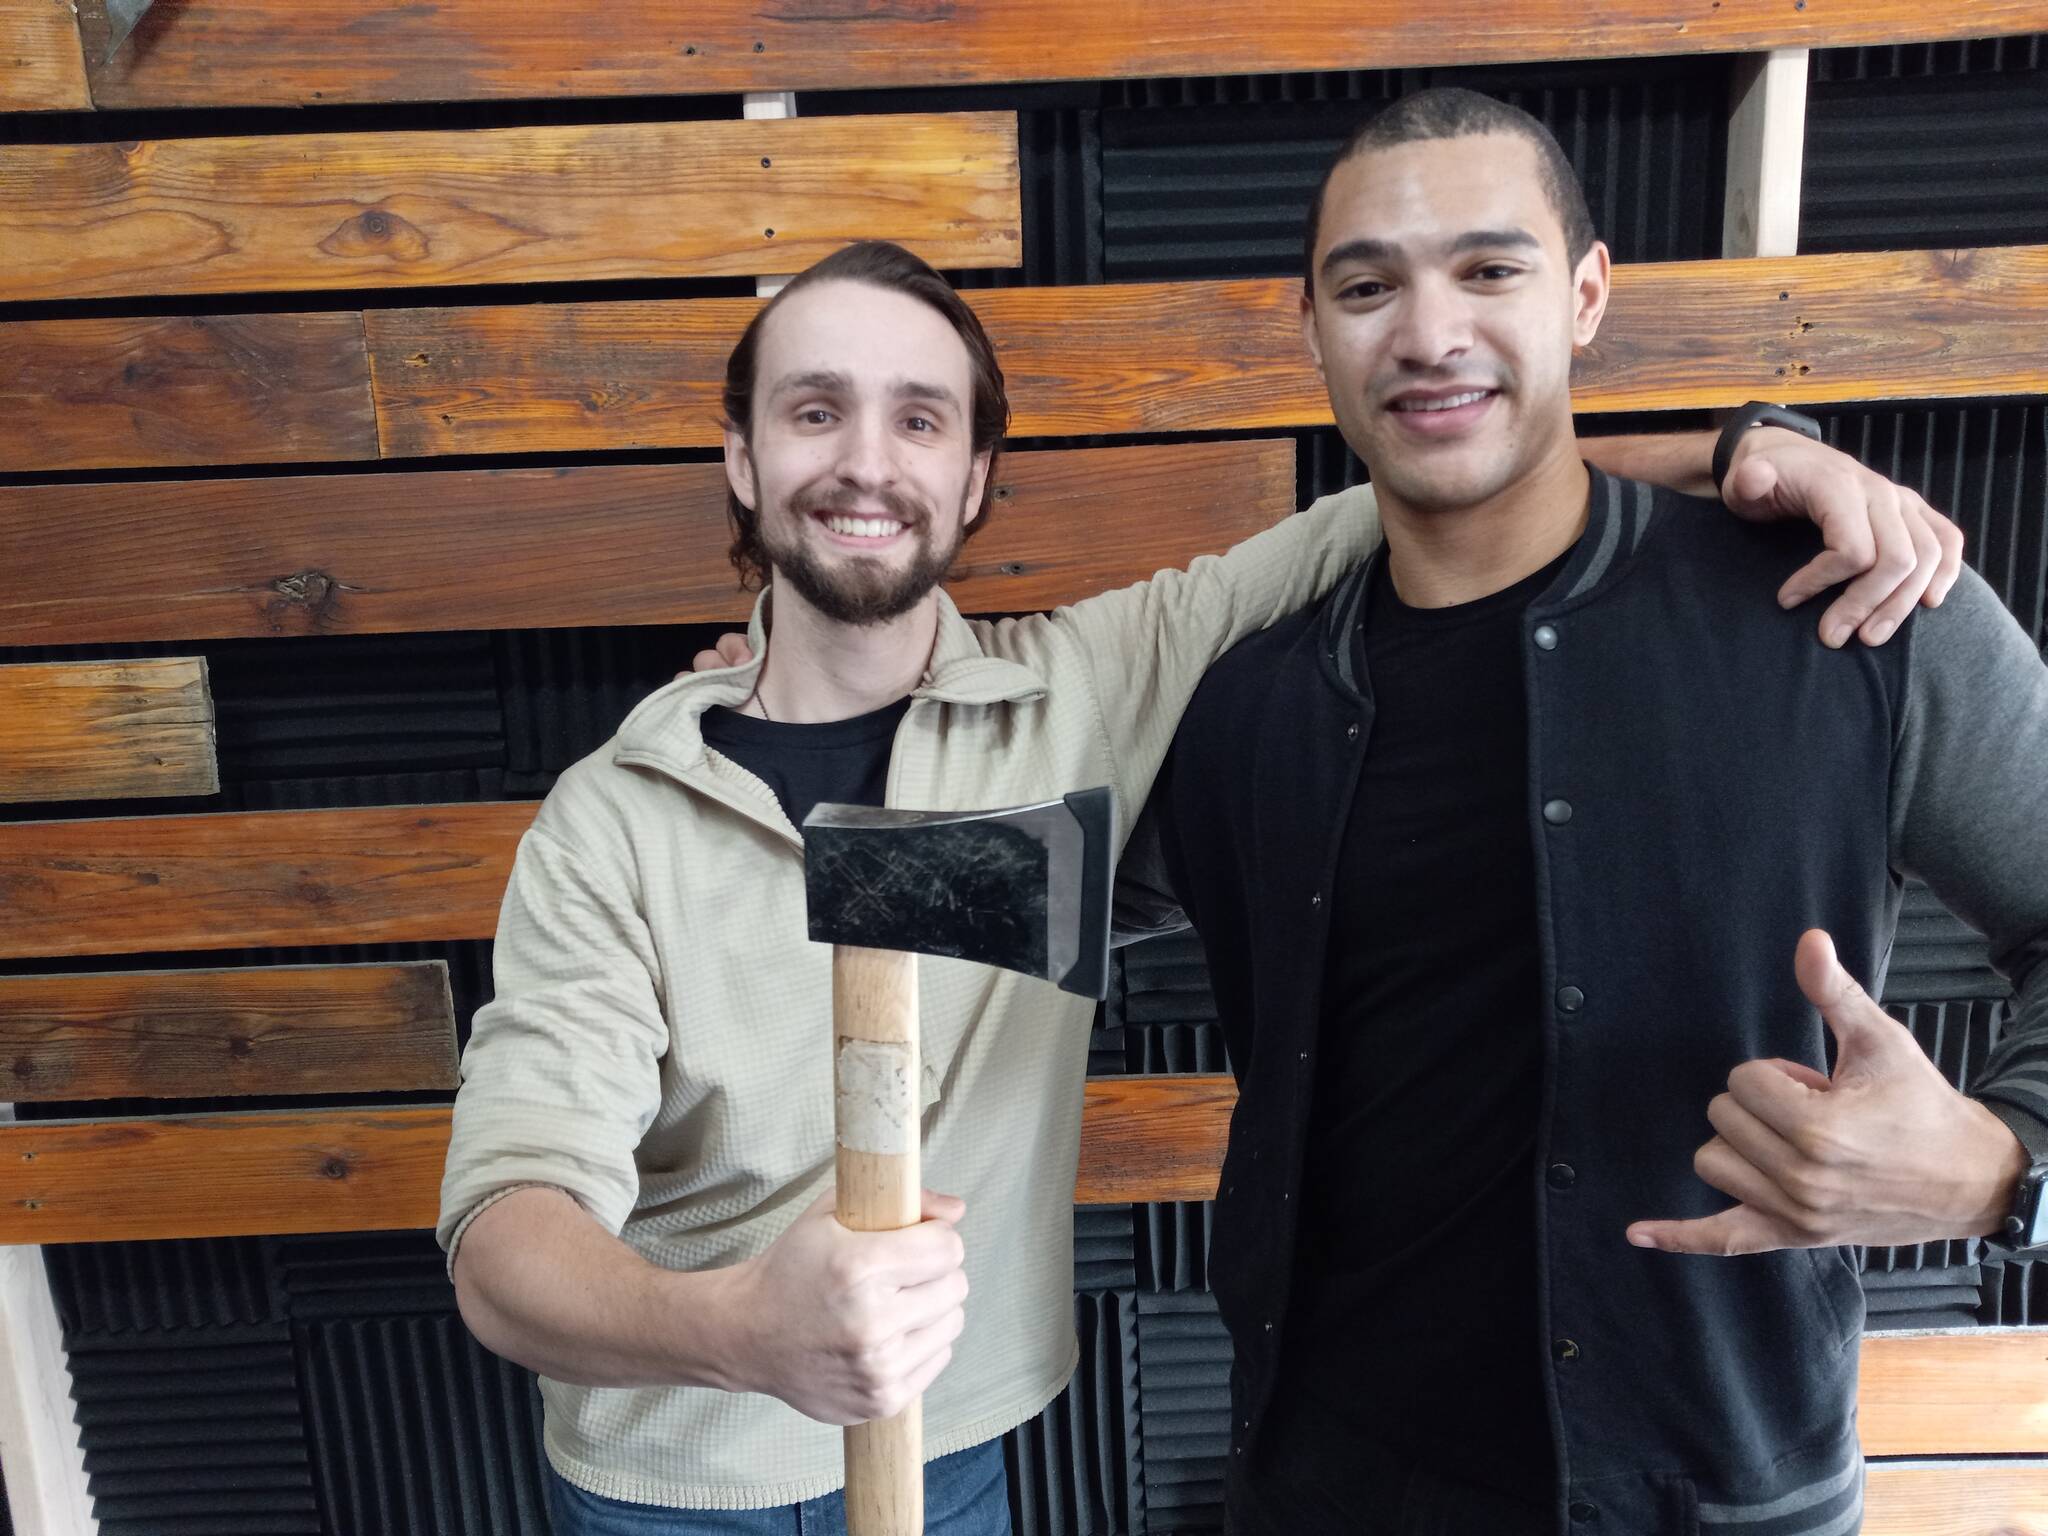 Duke Managhan, left, and his close friend and business partner, Vance Olsen, will open Auburn’s first and only axe-throwing range within two to three weeks on East Main Street. Photo by Robert Whale/Auburn Reporter